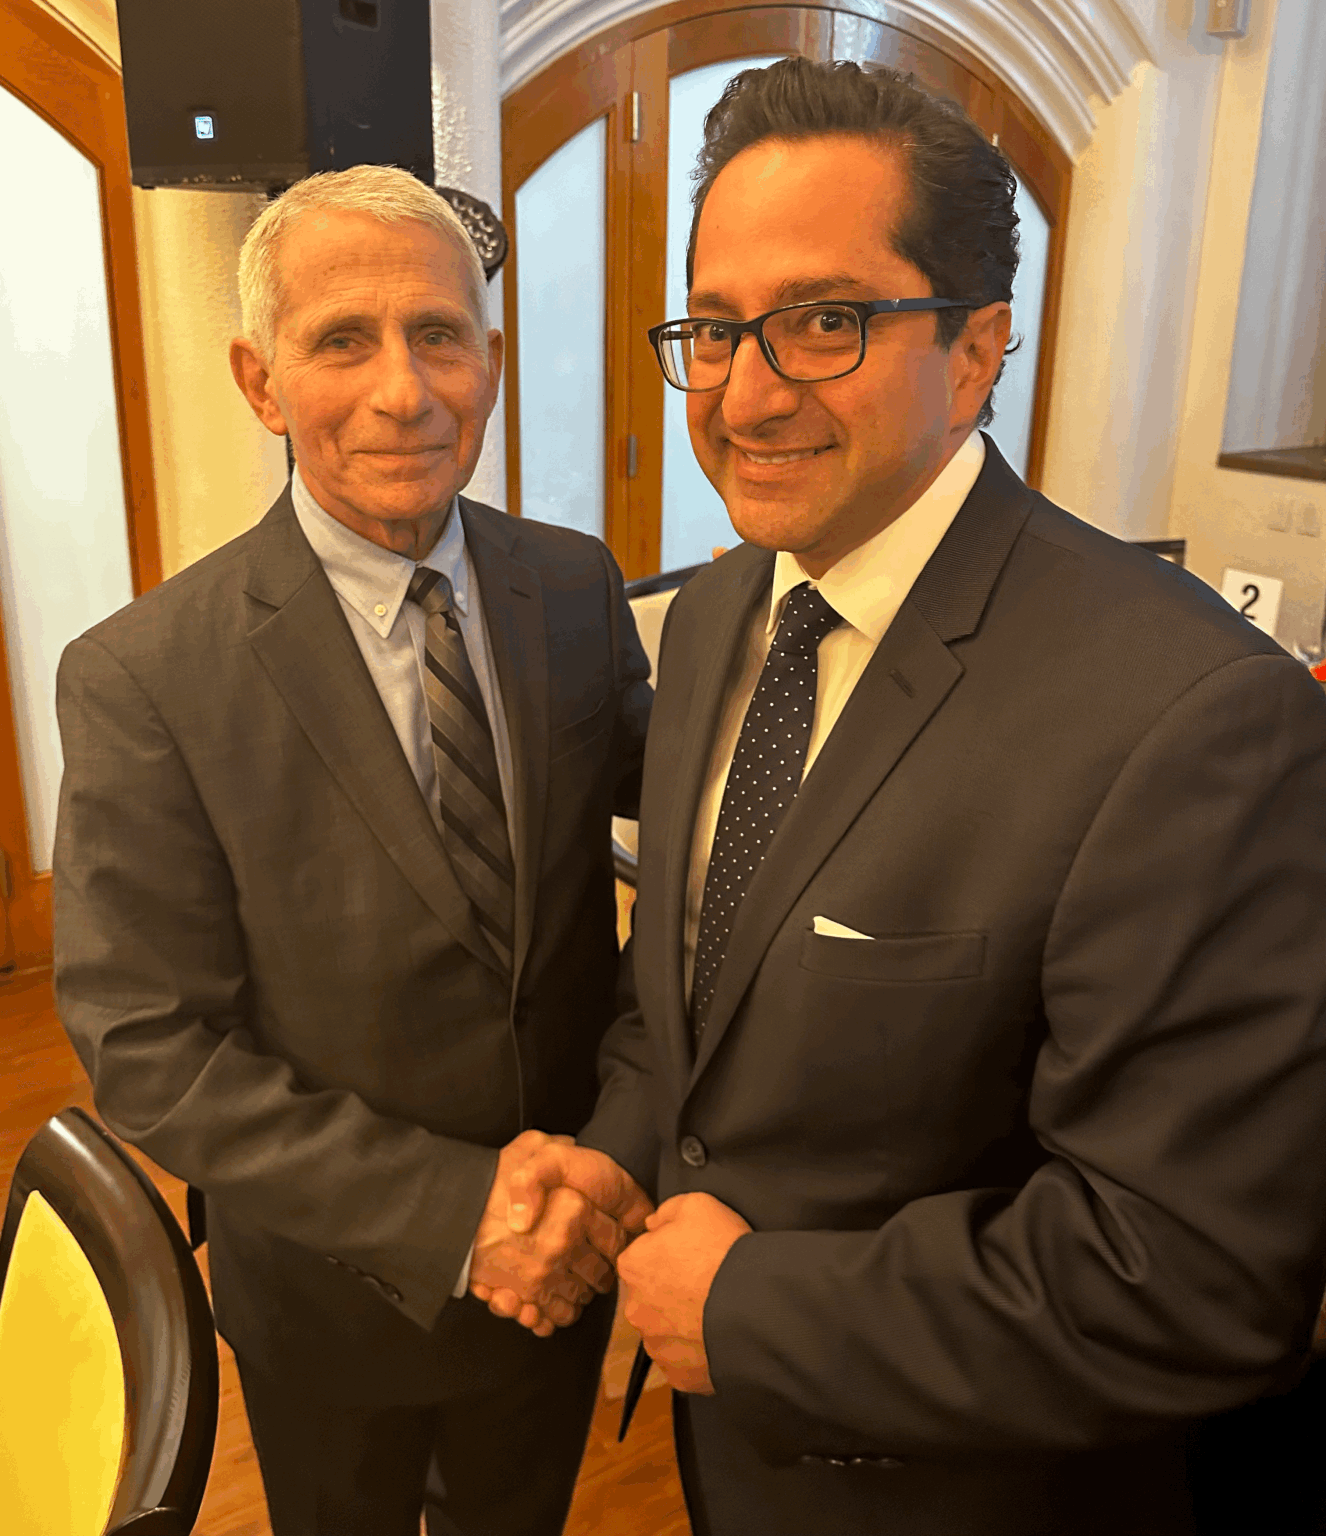 Ali Ardakani, Founder & managing Director of Novateur Ventures, was delighted to meet with Dr. Anthony Fauci at the Frank A. Calderone Prize in Public Health 2023